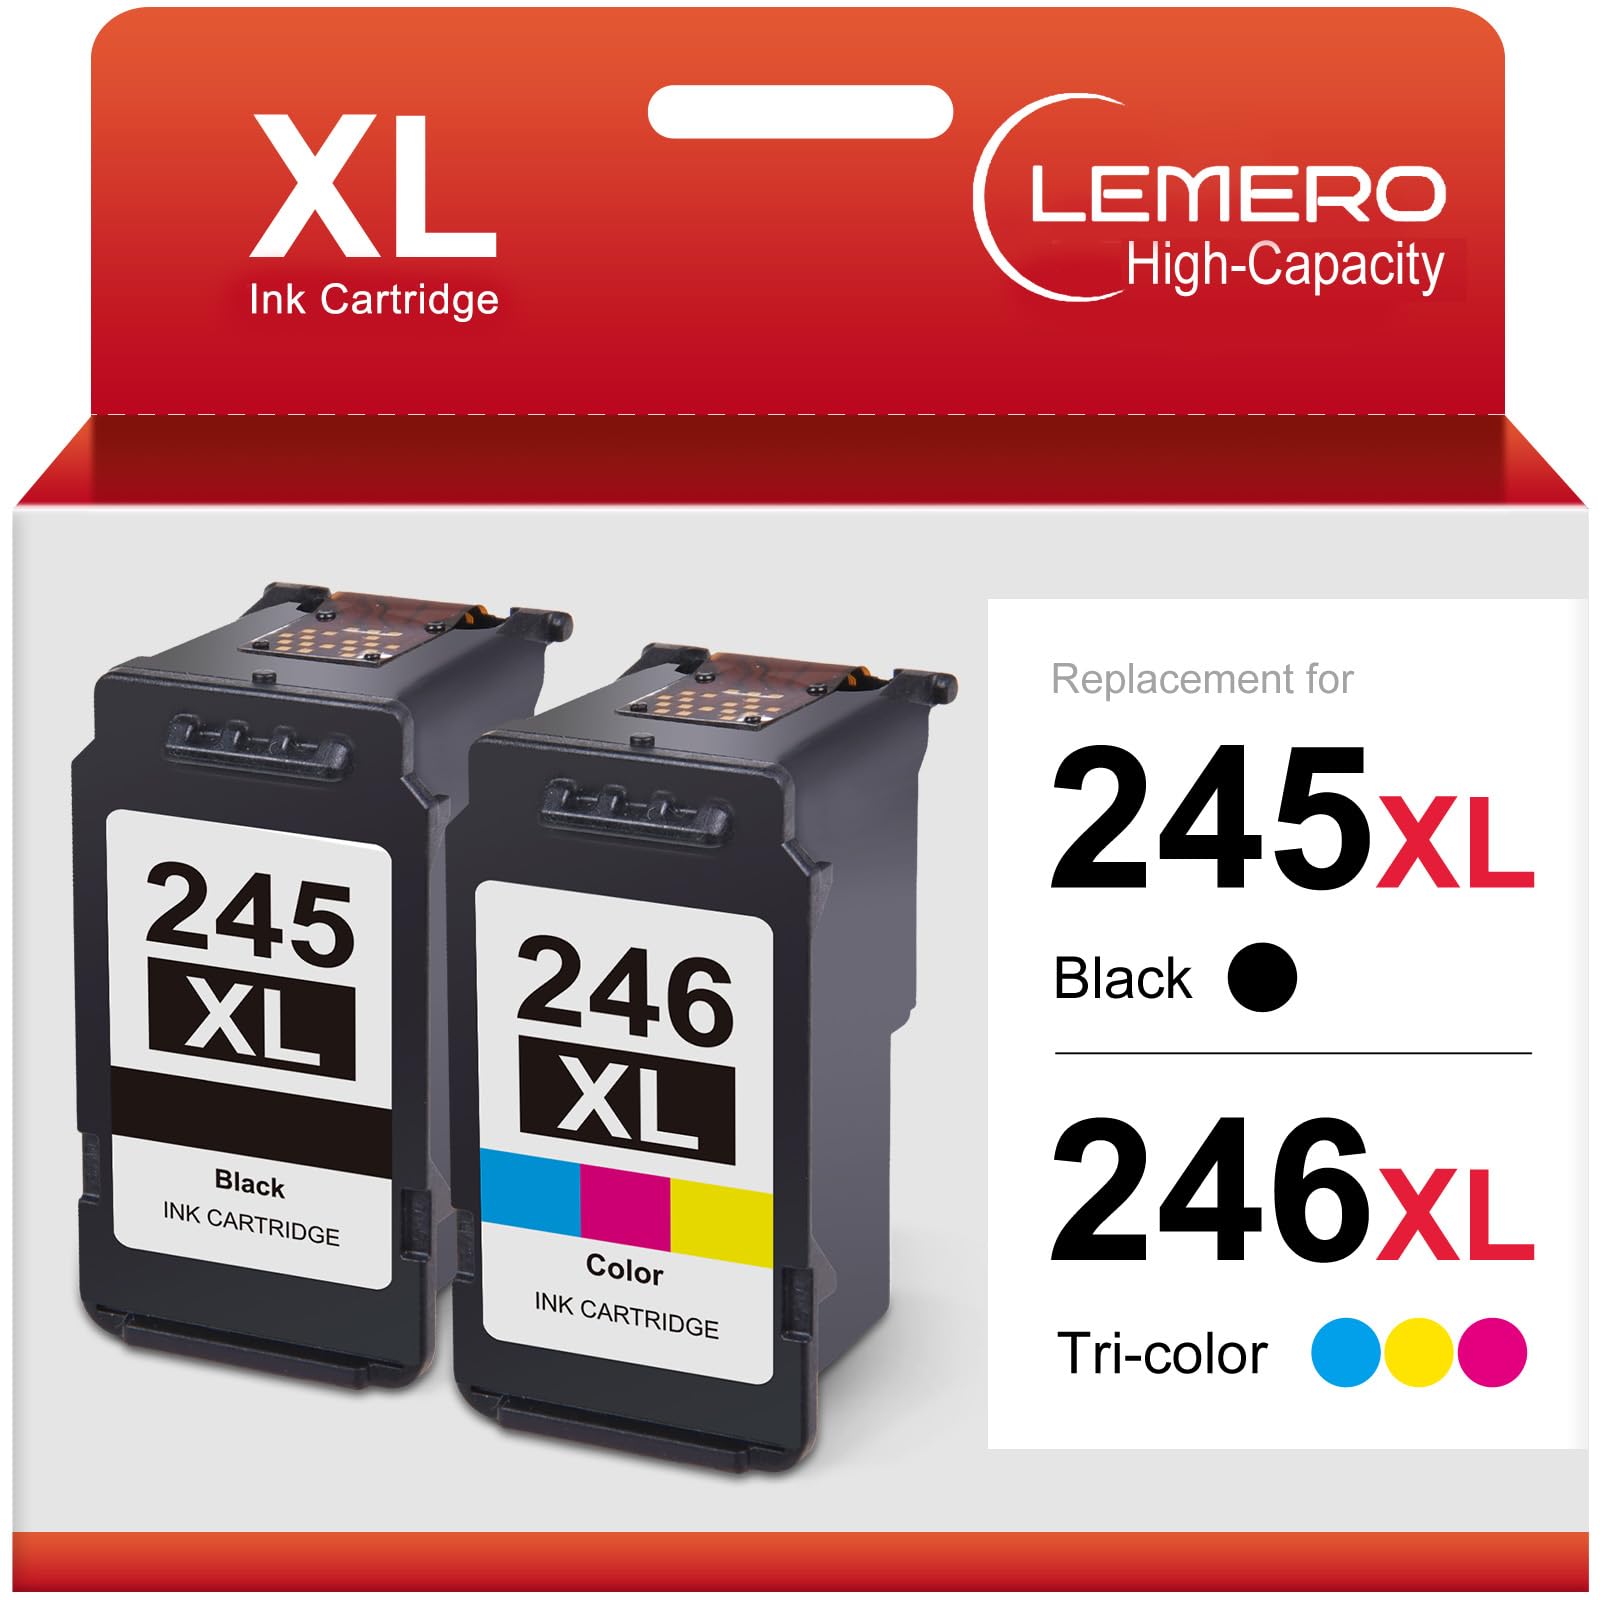 LEMERO High-Capacity Ink Cartridges: Packaging of LEMERO high-capacity 245XL black and 246XL color ink cartridges in a bright red box, emphasizing the extended yield and compatibility with printers.